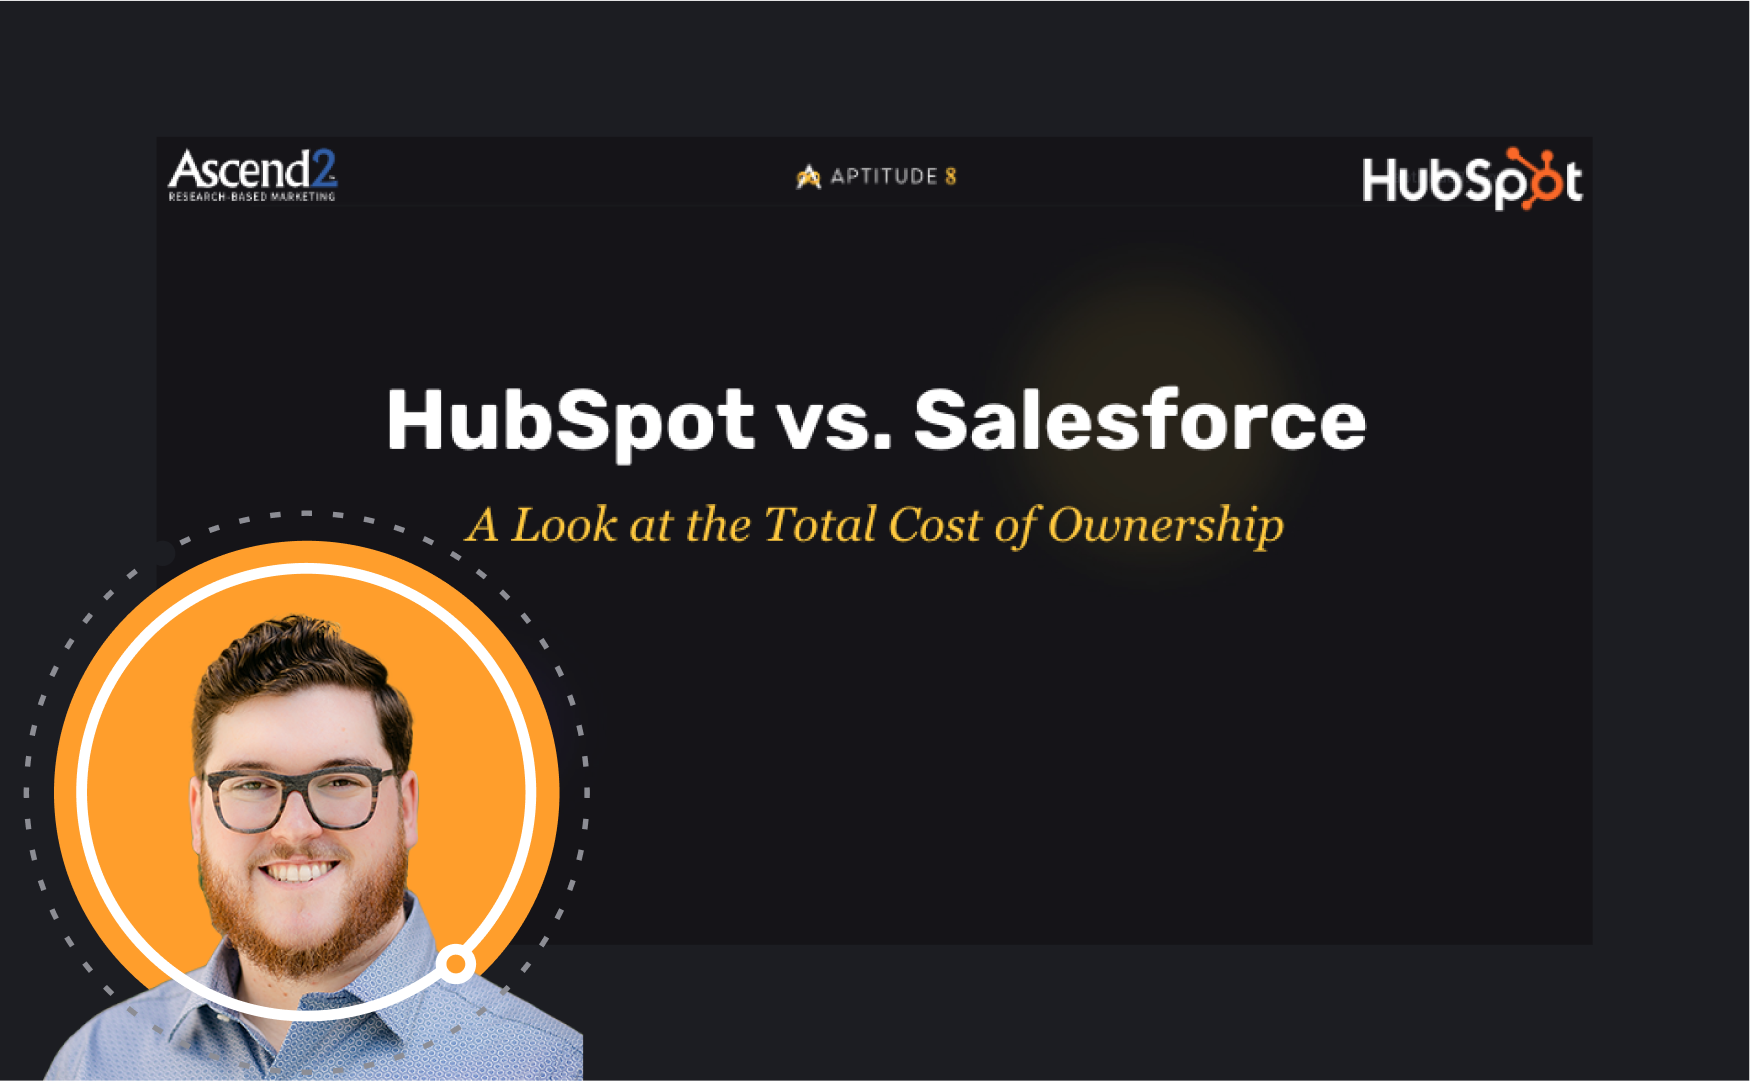 HubSpot vs. Salesforce: A Look at the Total Cost of Ownership